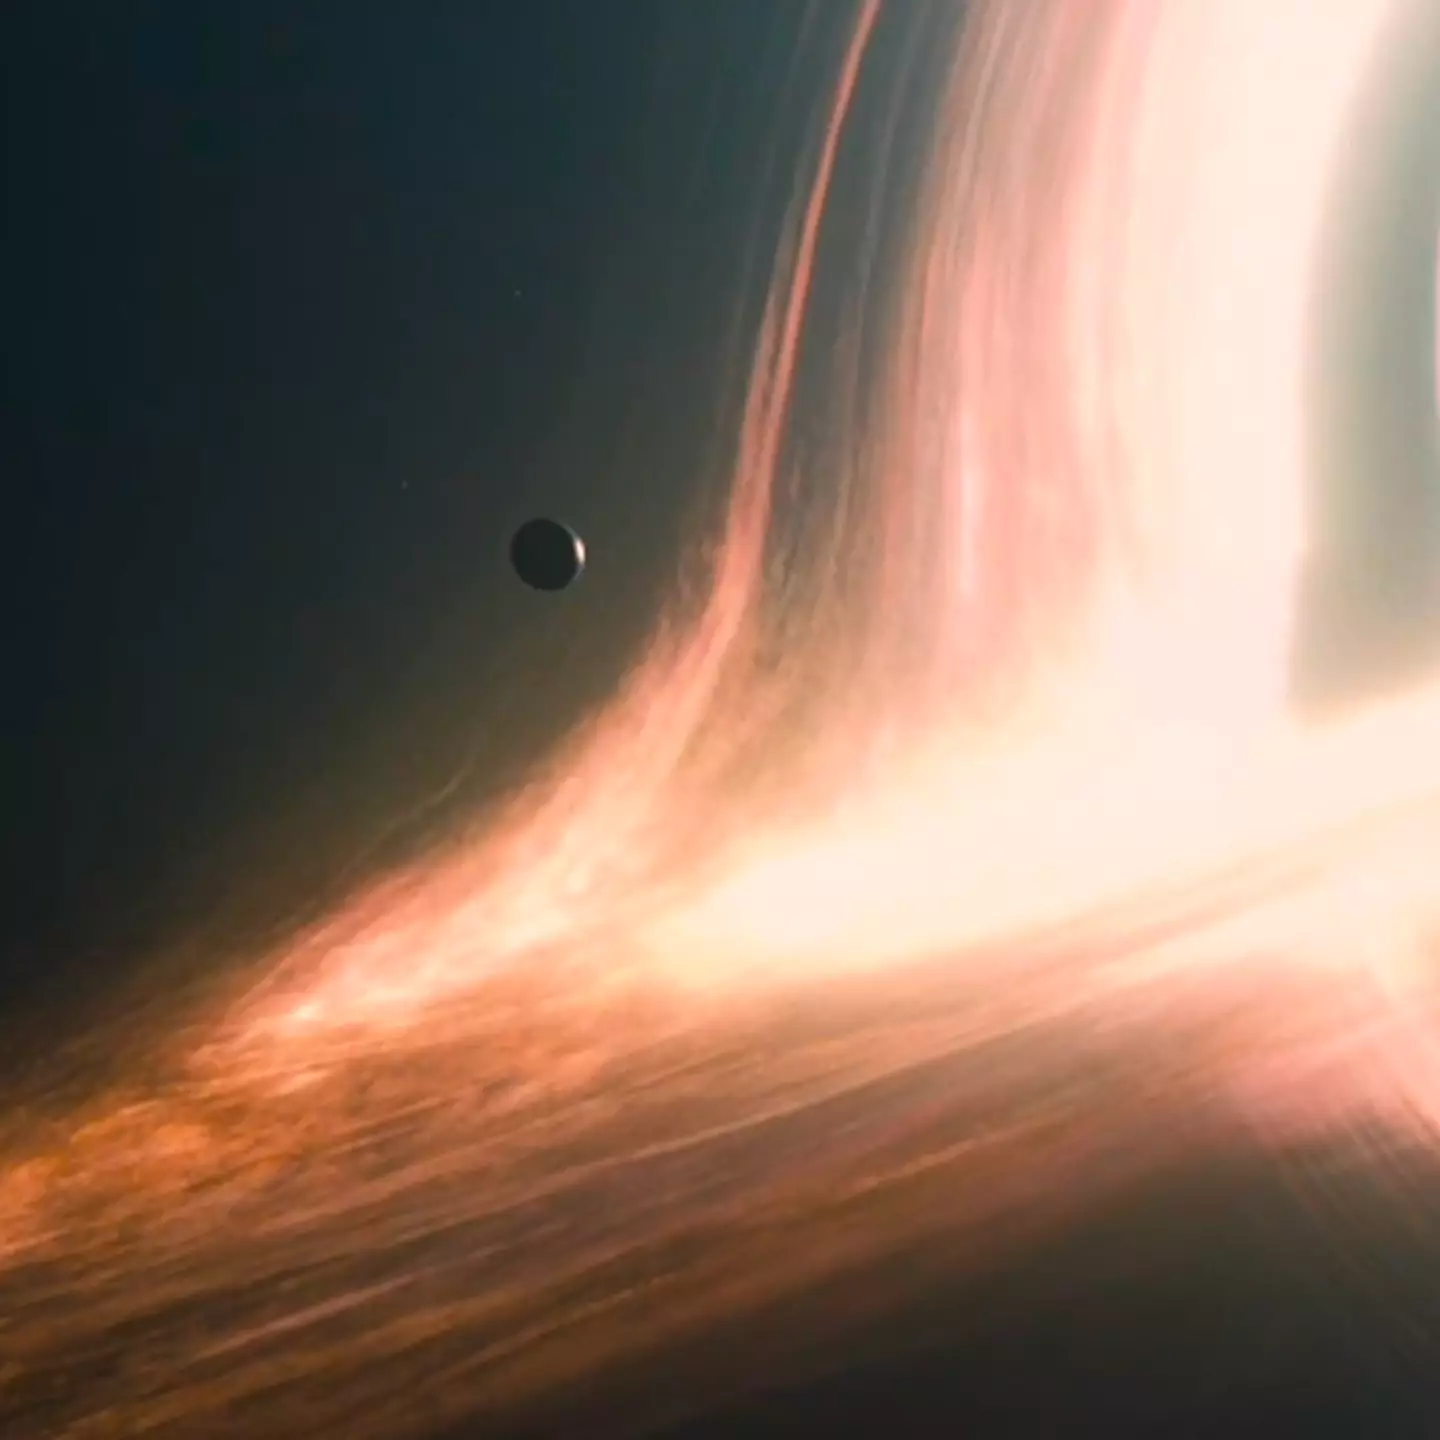 Scientists simulated a black hole in a lab to test Stephen Hawking's theory and it started to glow